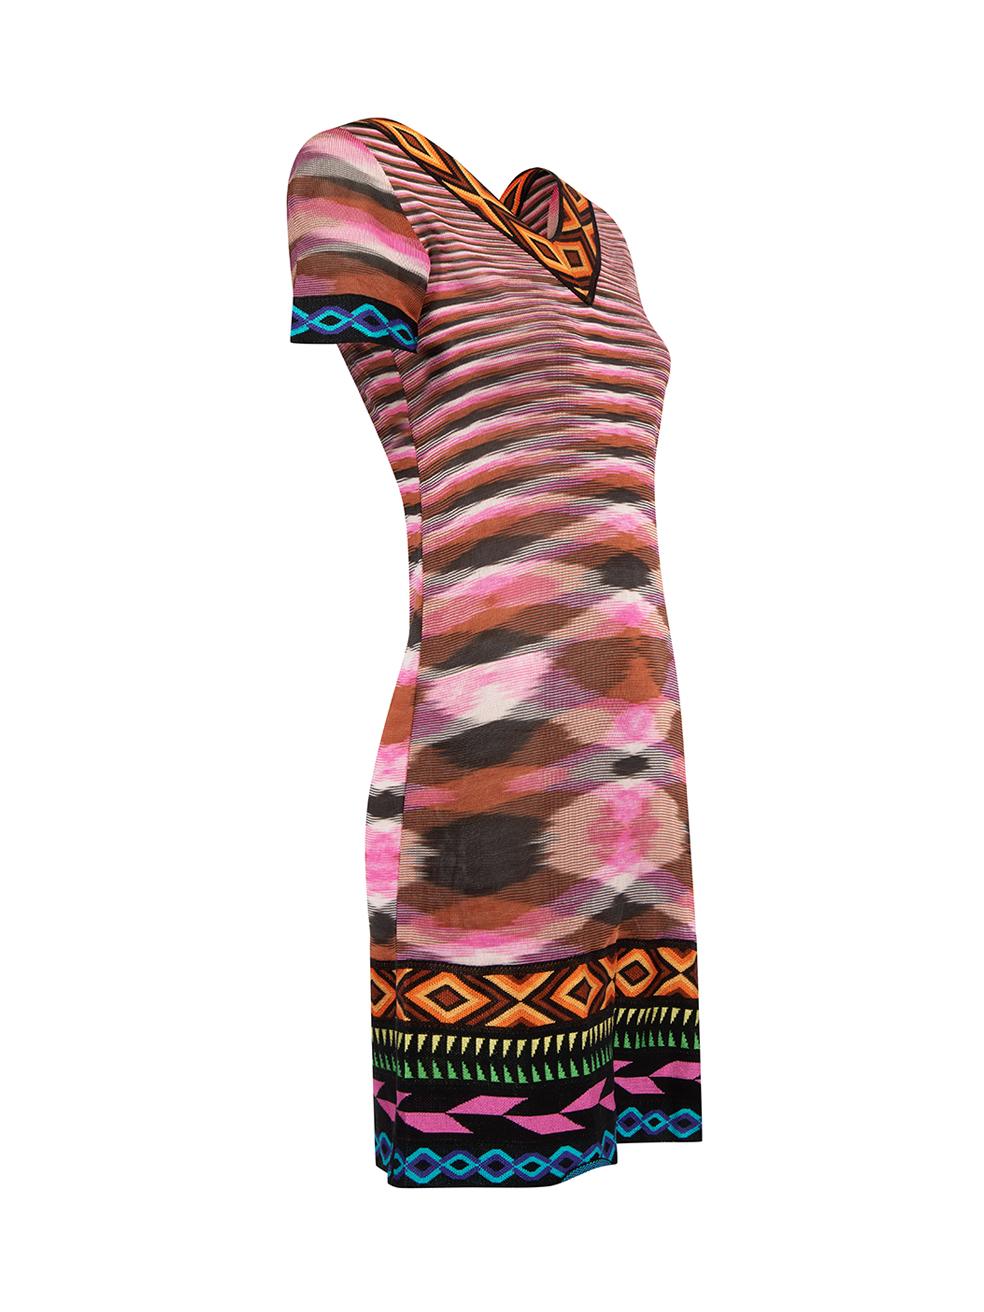 CONDITION is Never Worn. No visible wear to dress is evident on this used Missoni designer resale item. Details Multicolour Viscose Mini dress Ethnic pattern Short sleeves V neckline Made in Italy Composition 100% Viscose Care instructions: